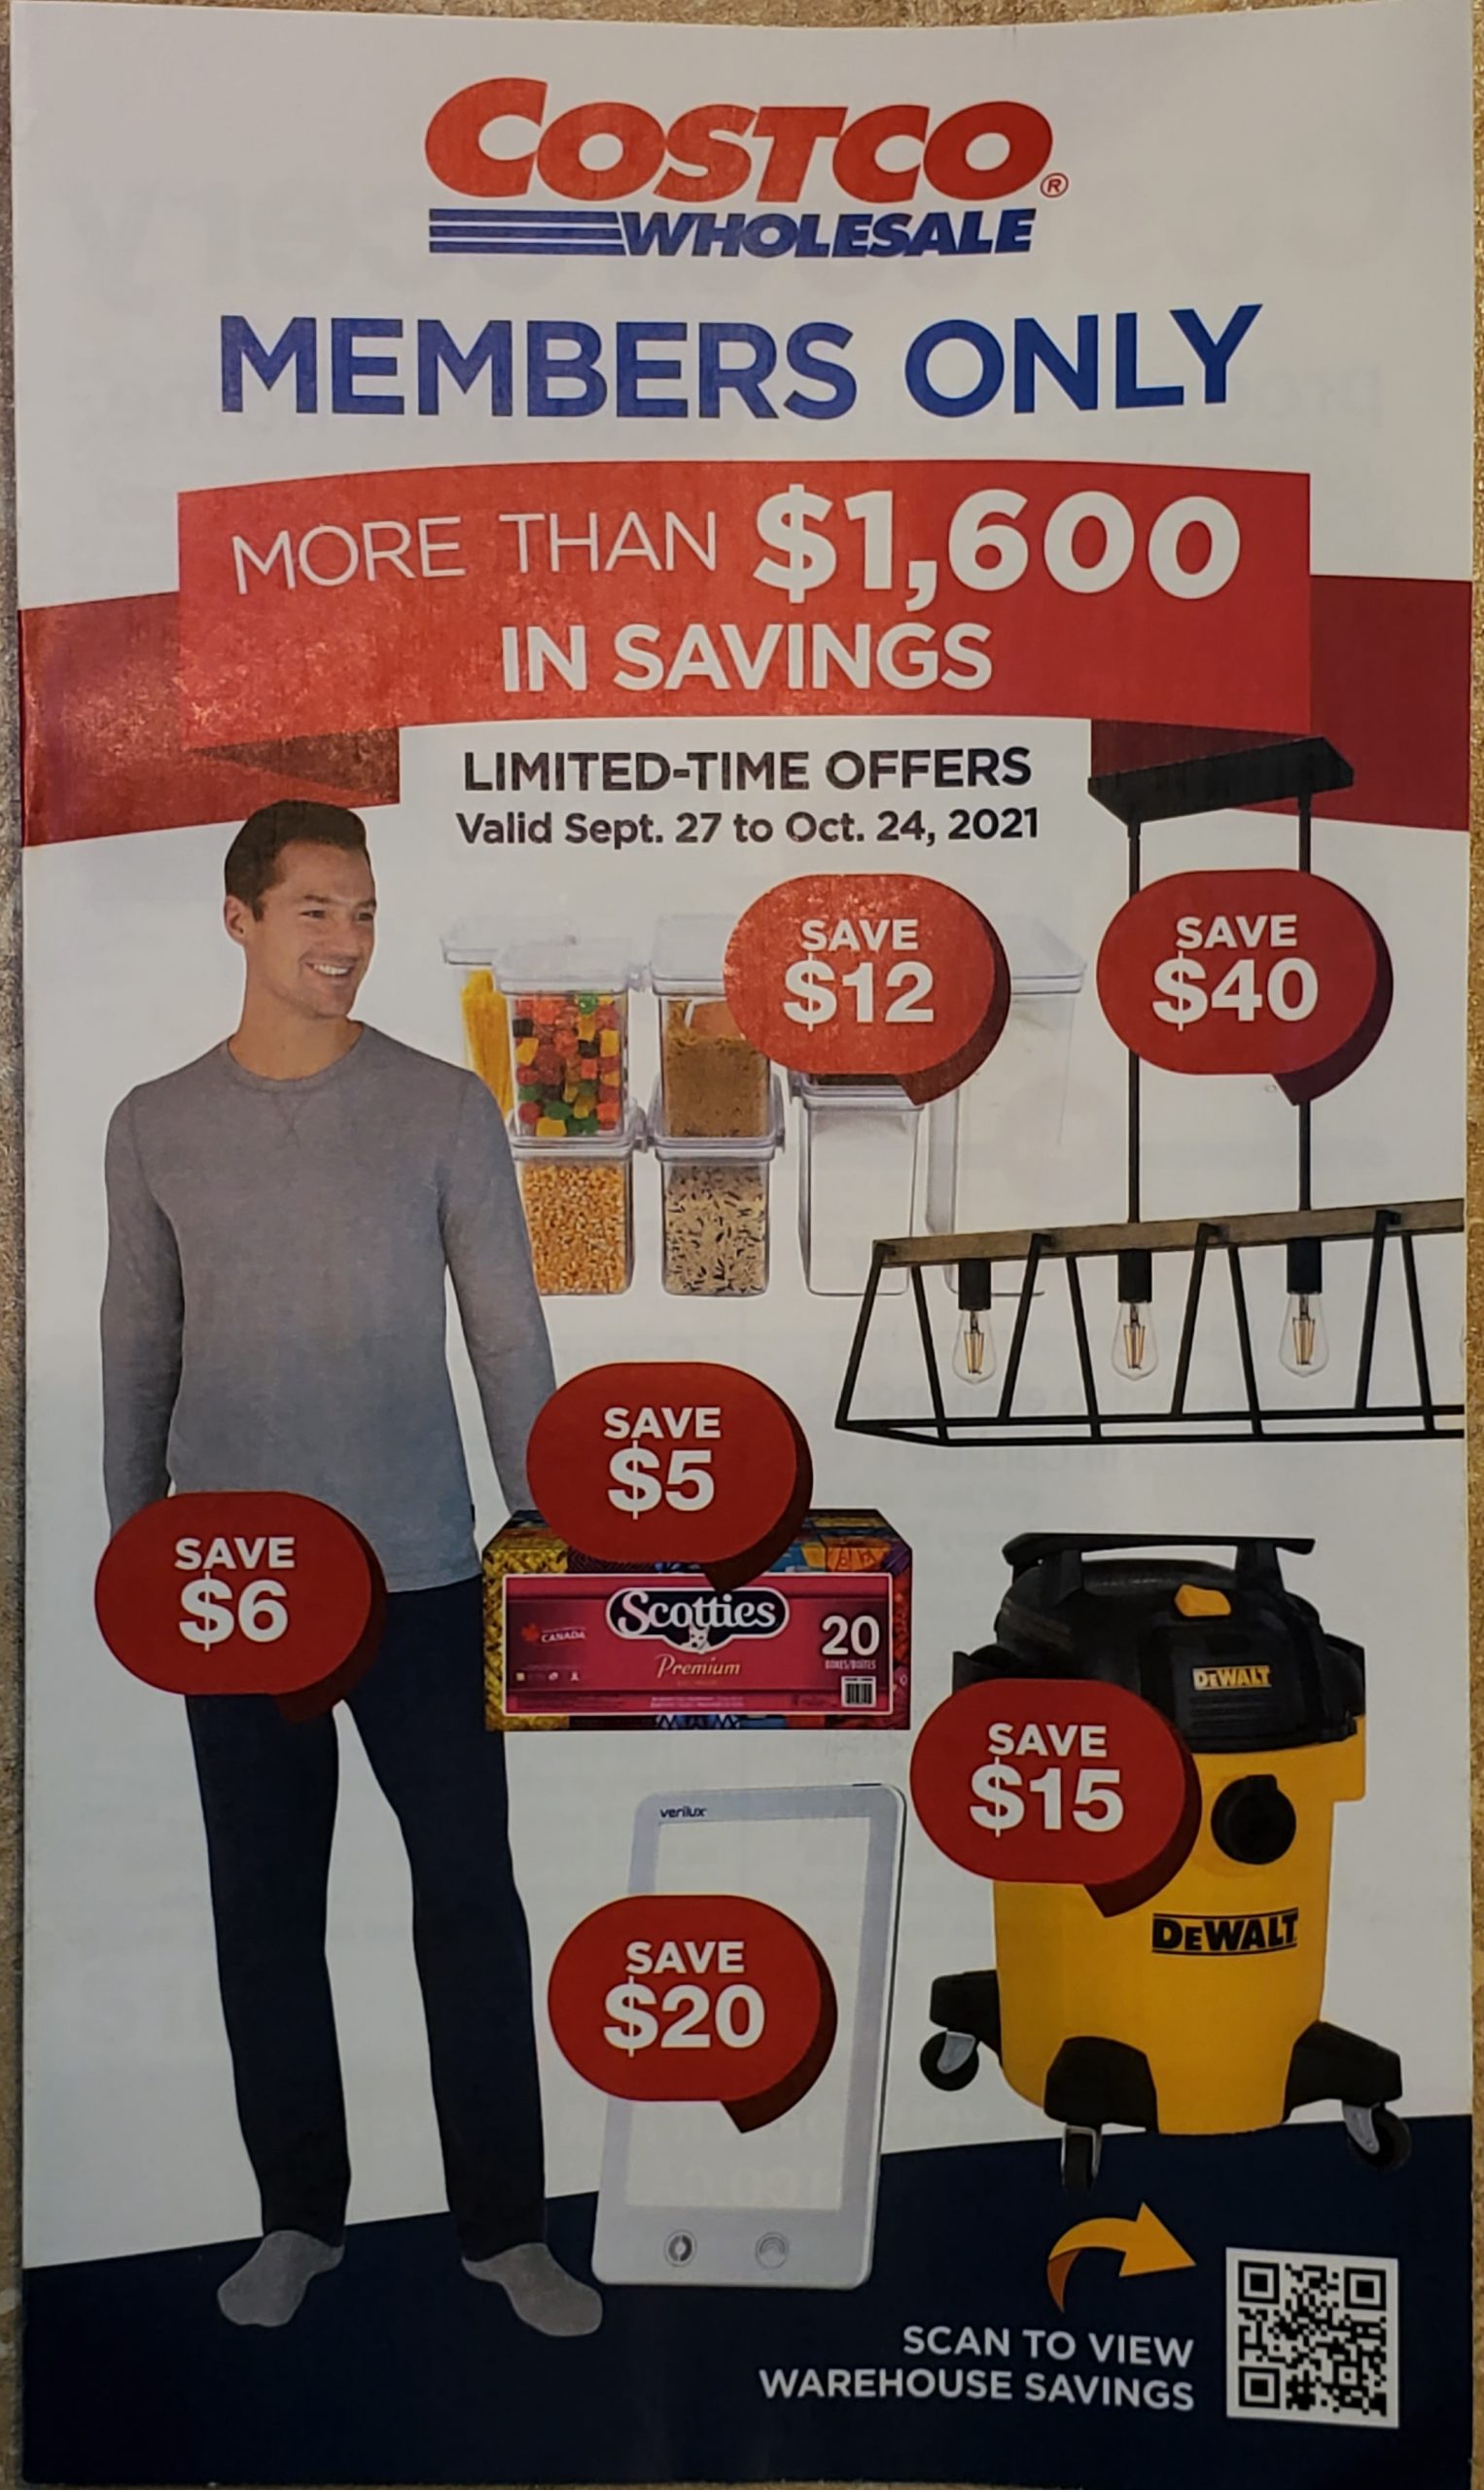 Costco Flyer Sales preview for Sept 27th - October 24th 2021